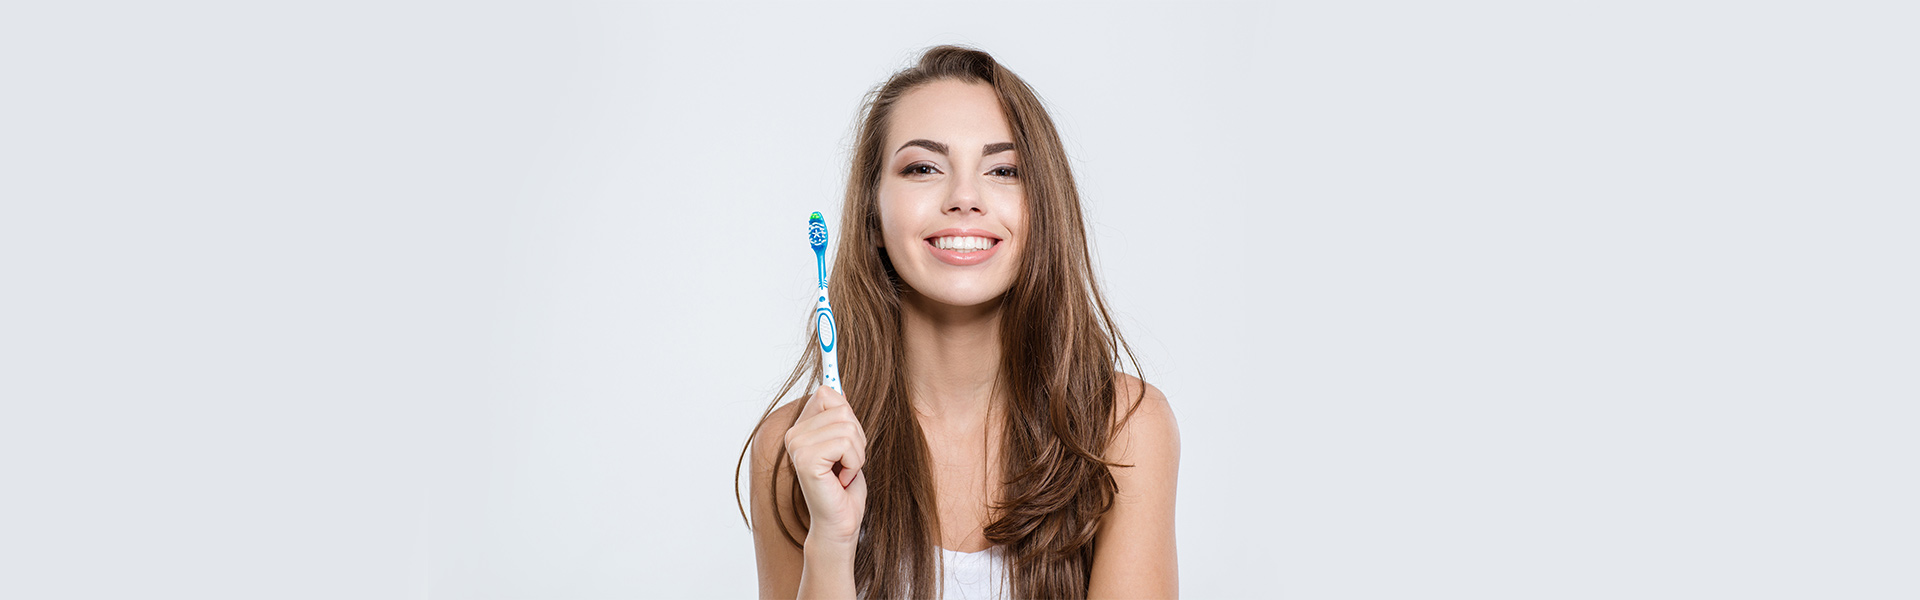 Lady Holding Toothbrush in Hand